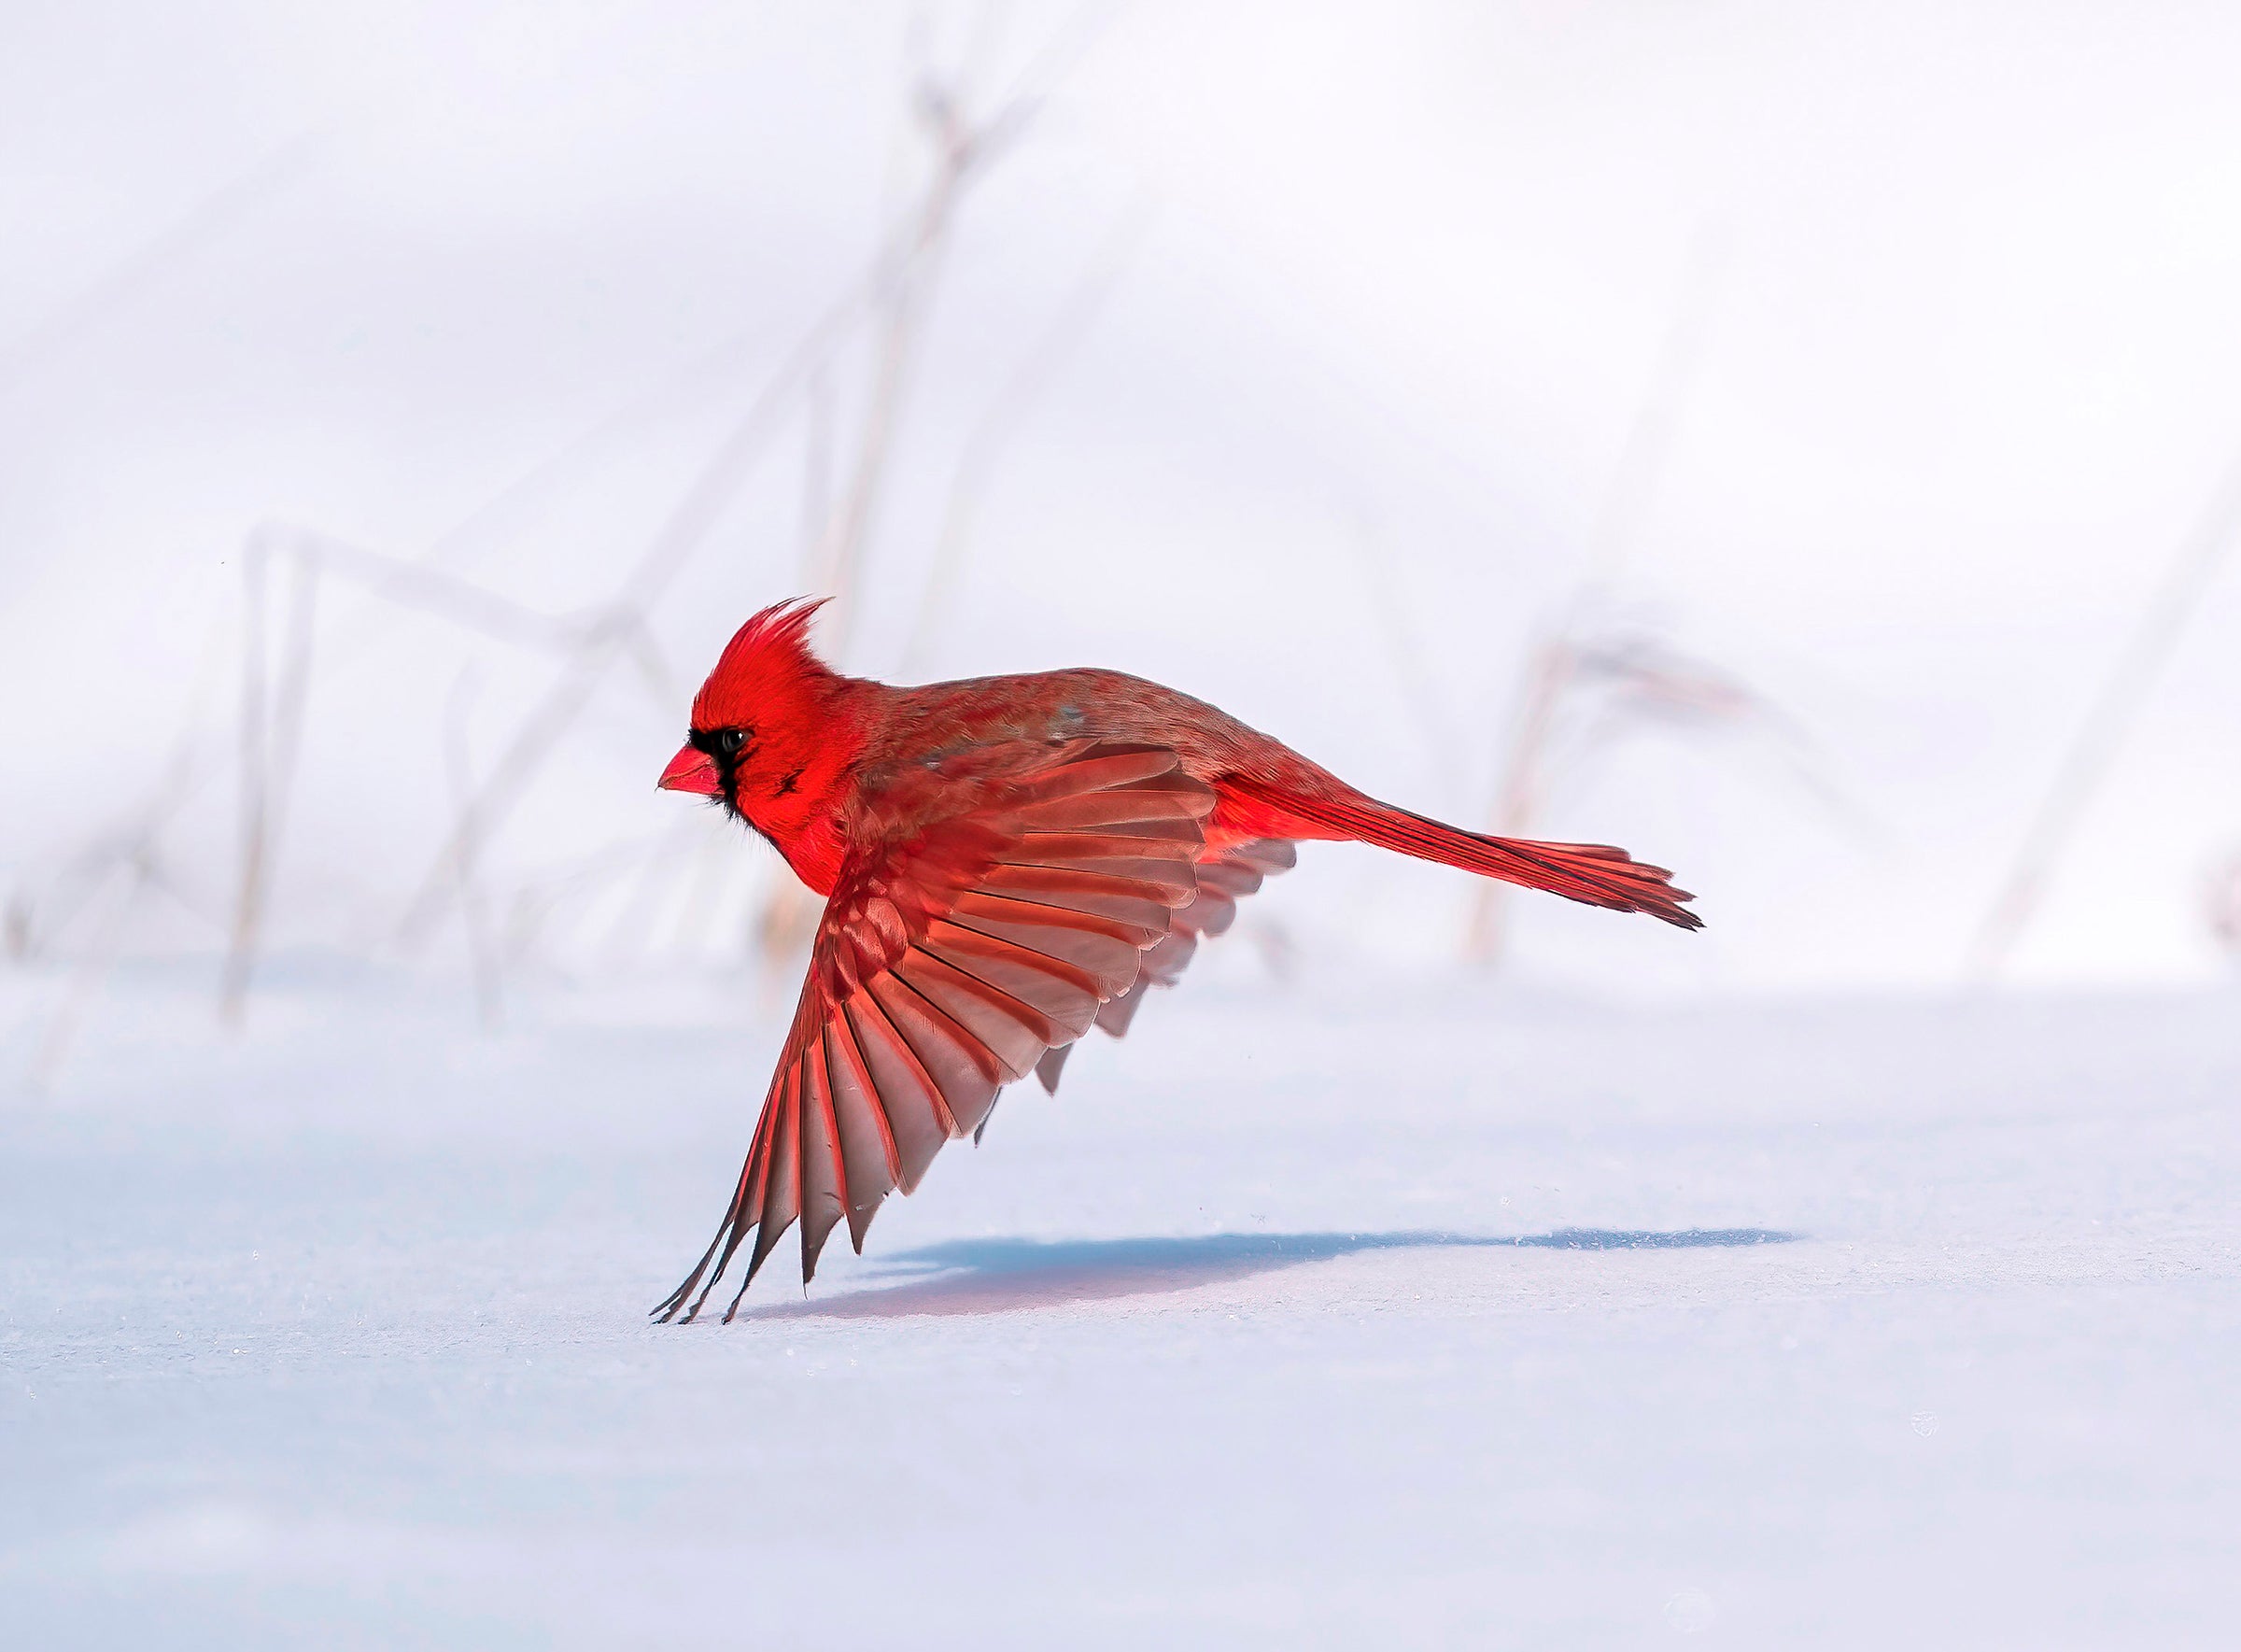 Check out these incredible images from the 2021 Audubon Photography Awards